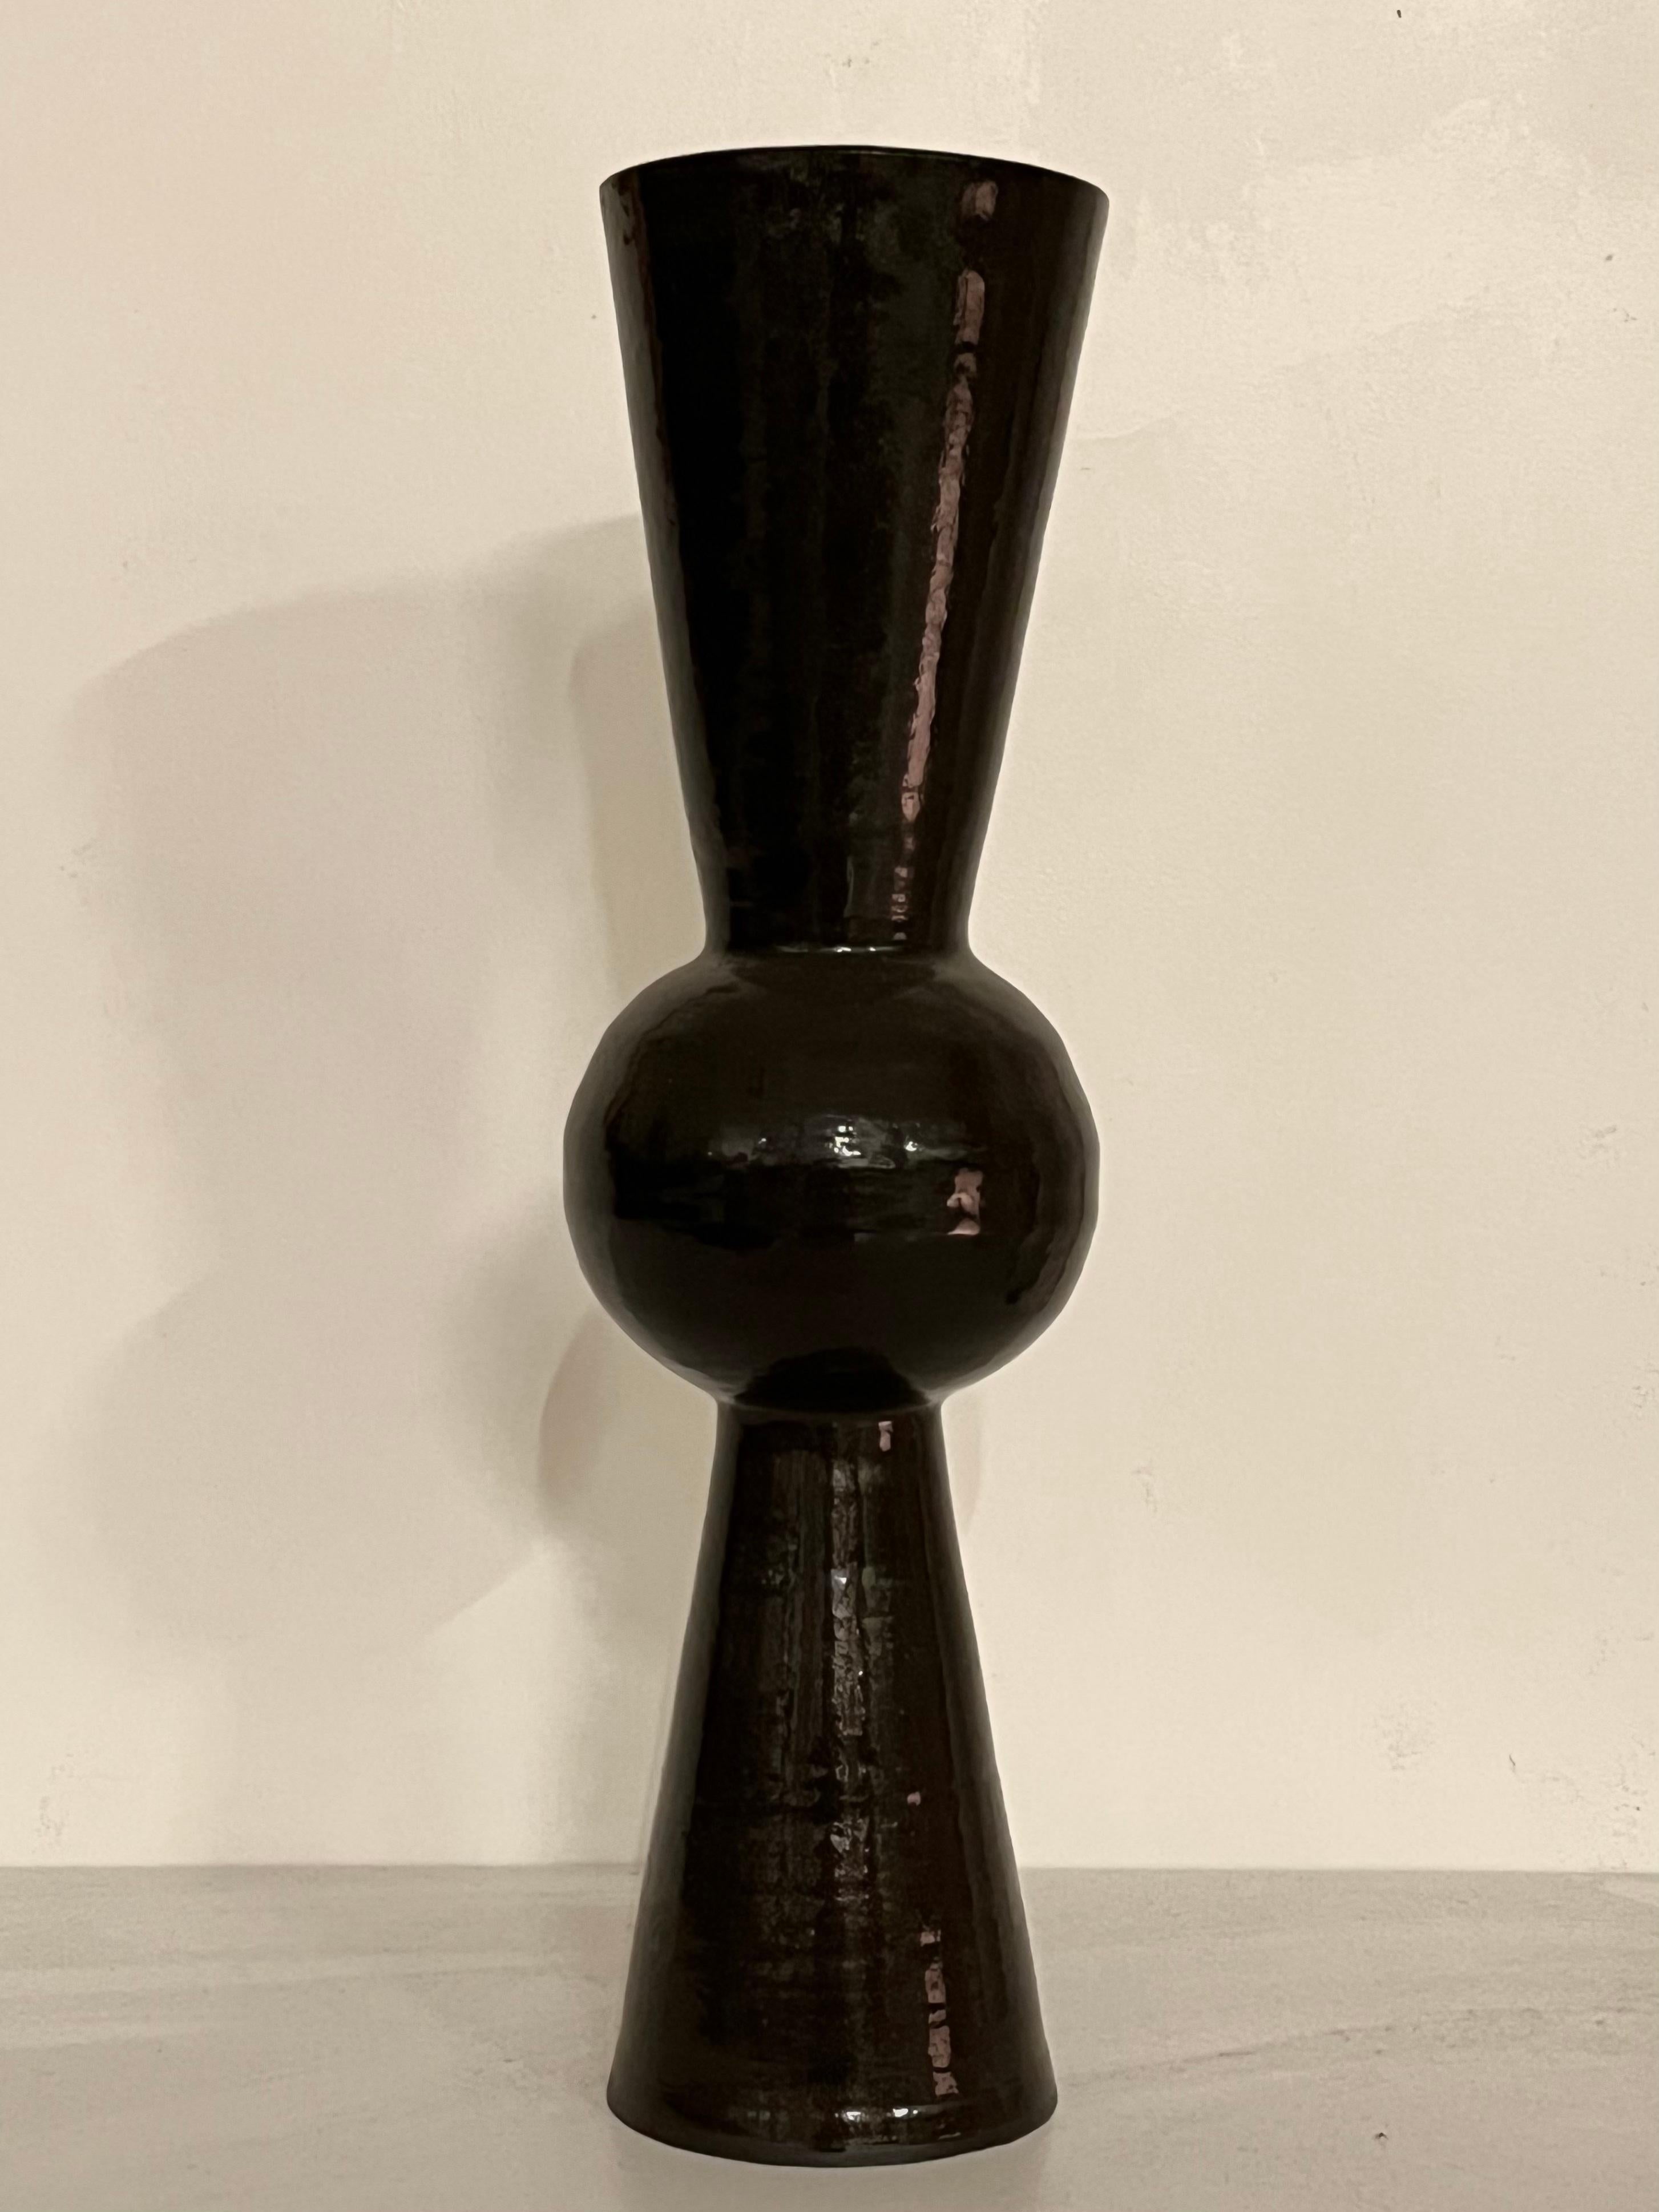 Black Bonbon vase by Solem Ceramics.
Dimensions: Ø 12.7 x H 34.5 cm.
Materials: stoneware, glaze.
This vase is water safe.

Solem’s work pulls from memories of the architecture and community within SWANA and Southeast Asia thorough exploring